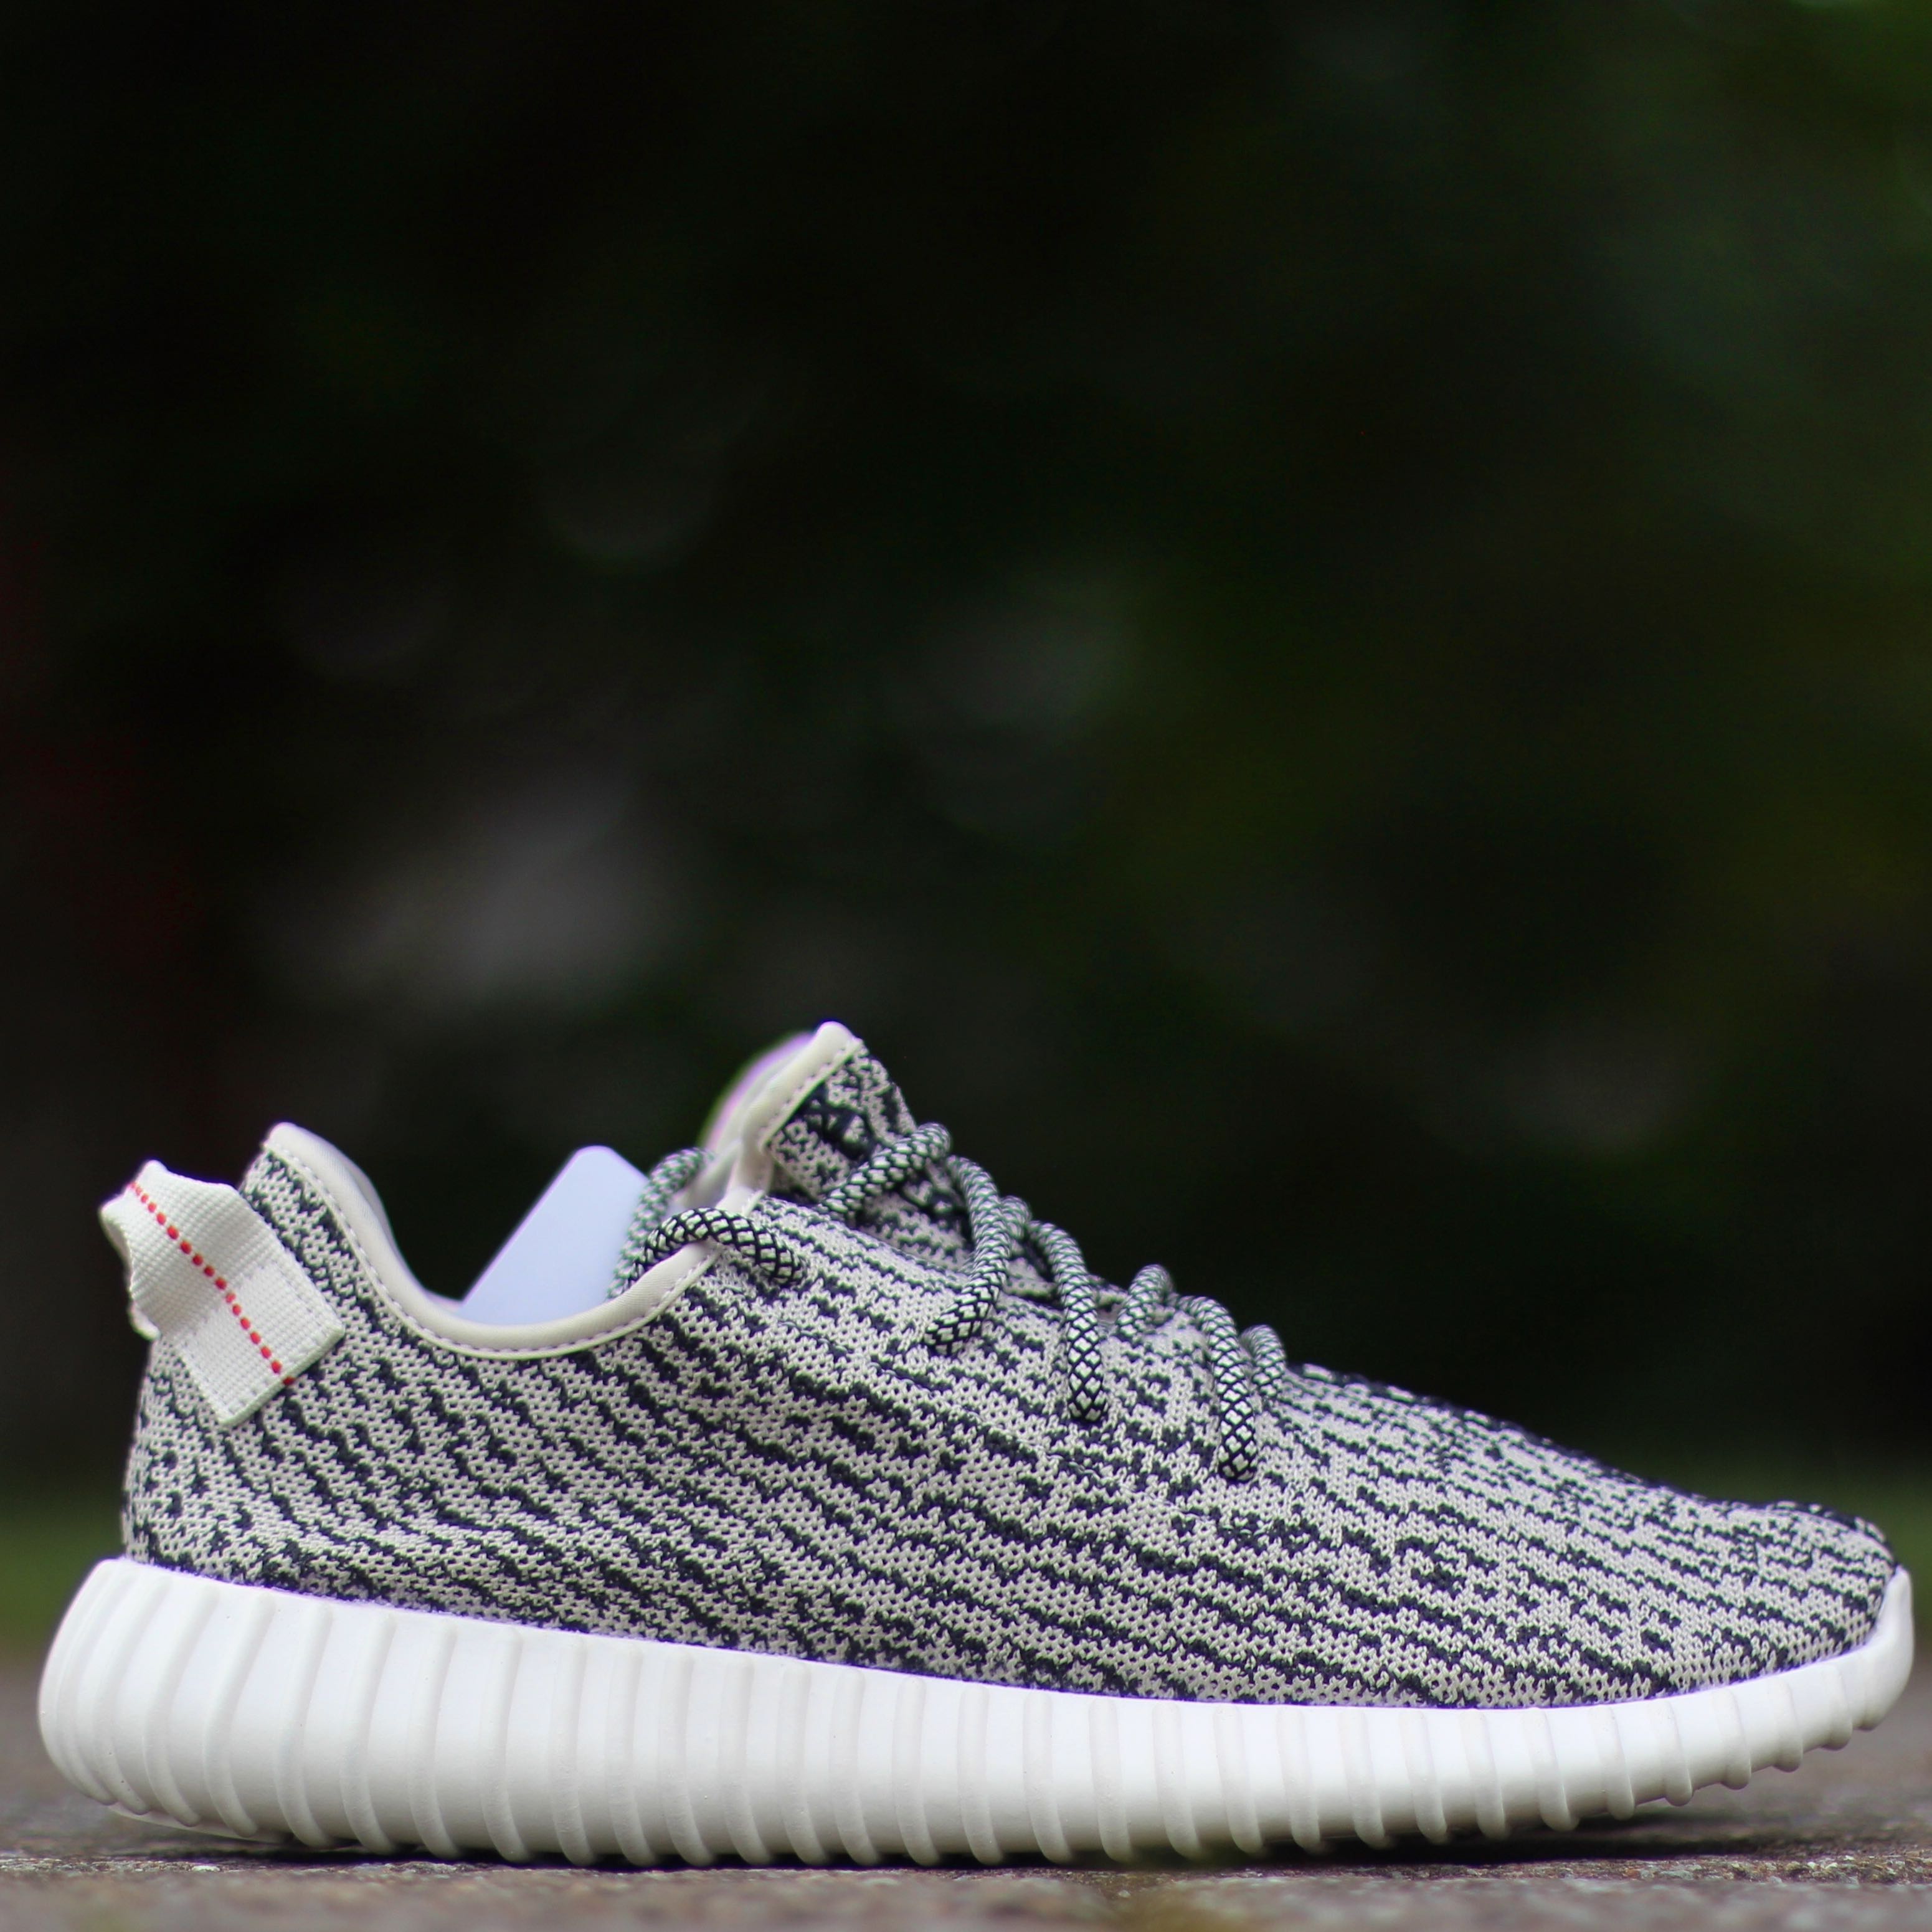 Adidas Yeezy Boost 350 Turtle Dove Cheapyeezy Dhgate Review